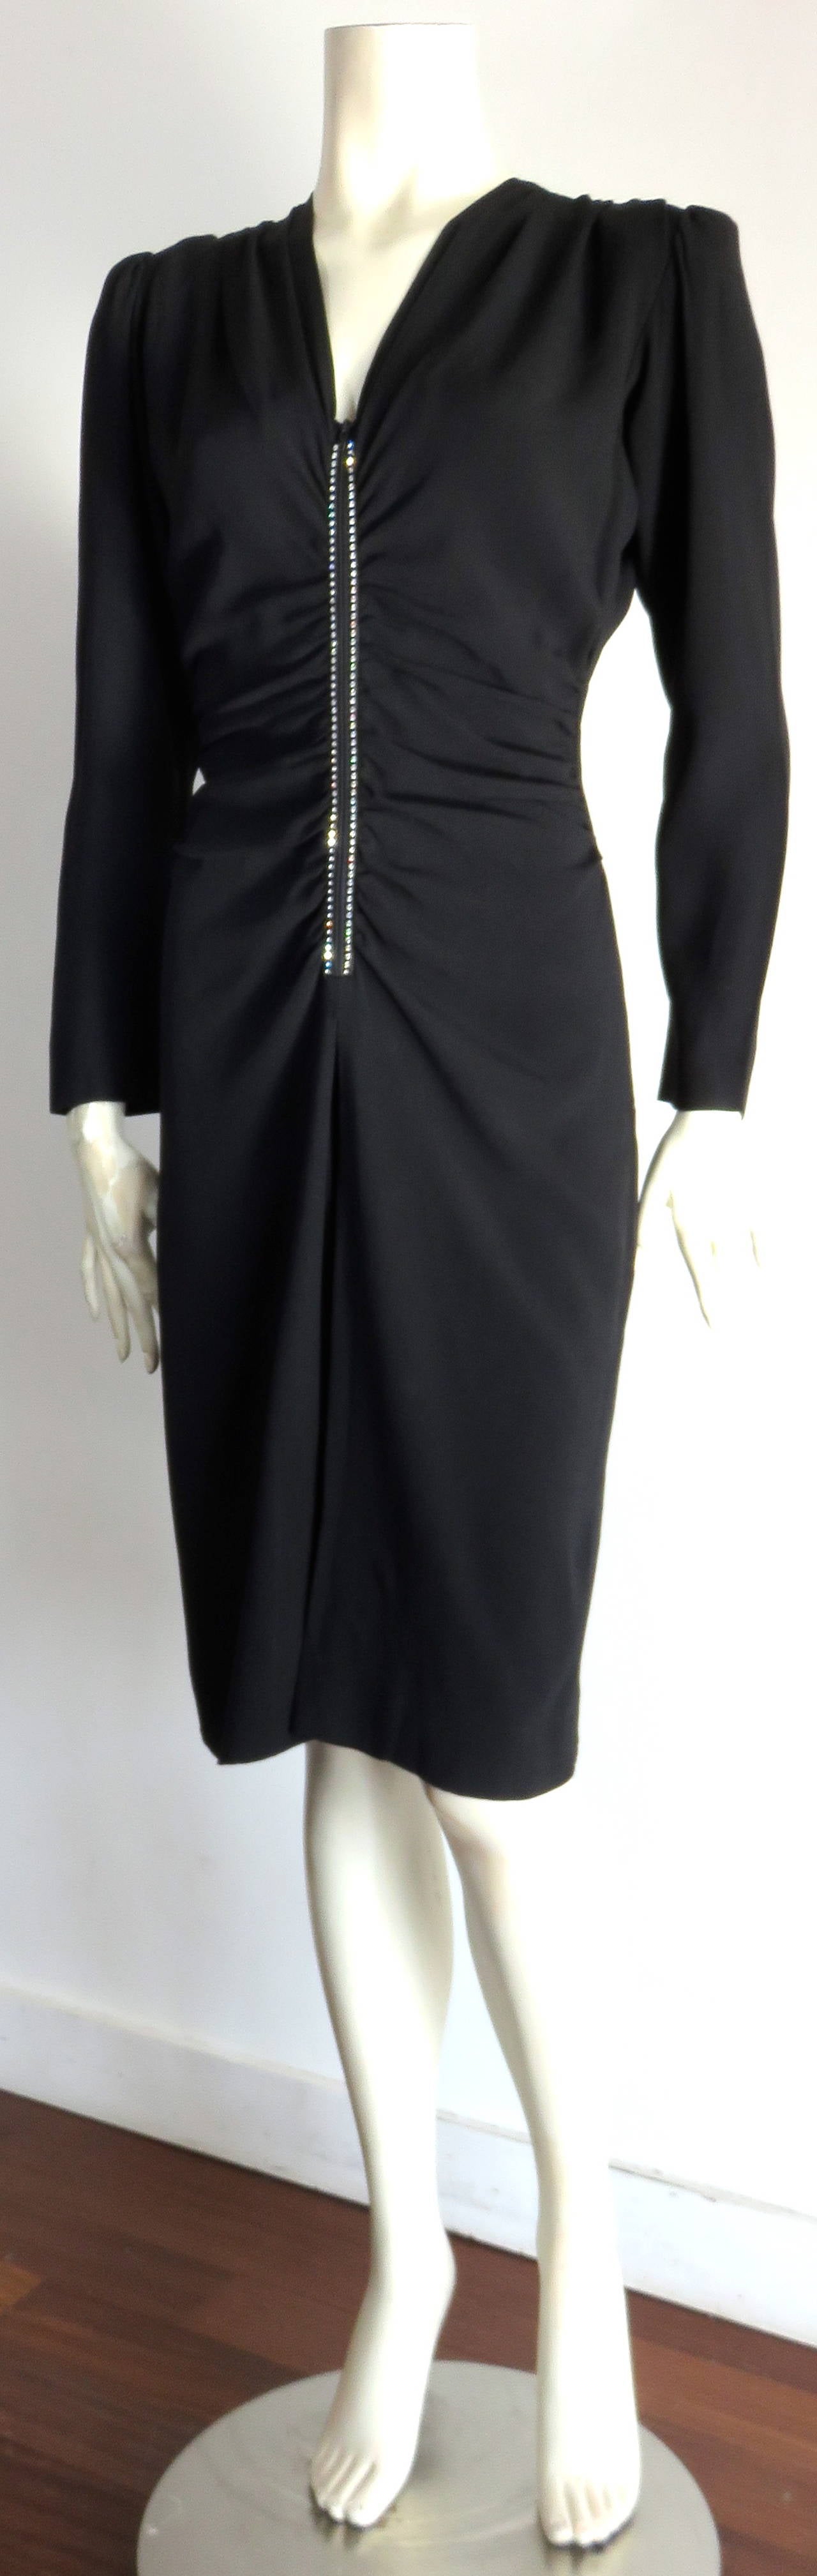 Stunning, 1970's YVES SAINT LAURENT 40's style cocktail dress.

Mr. Saint Laurent was thoroughly inspired by the silhouettes of the 1940's, updating them for the 70's, and this dress is of no exception.  

The dress features soft, ruche